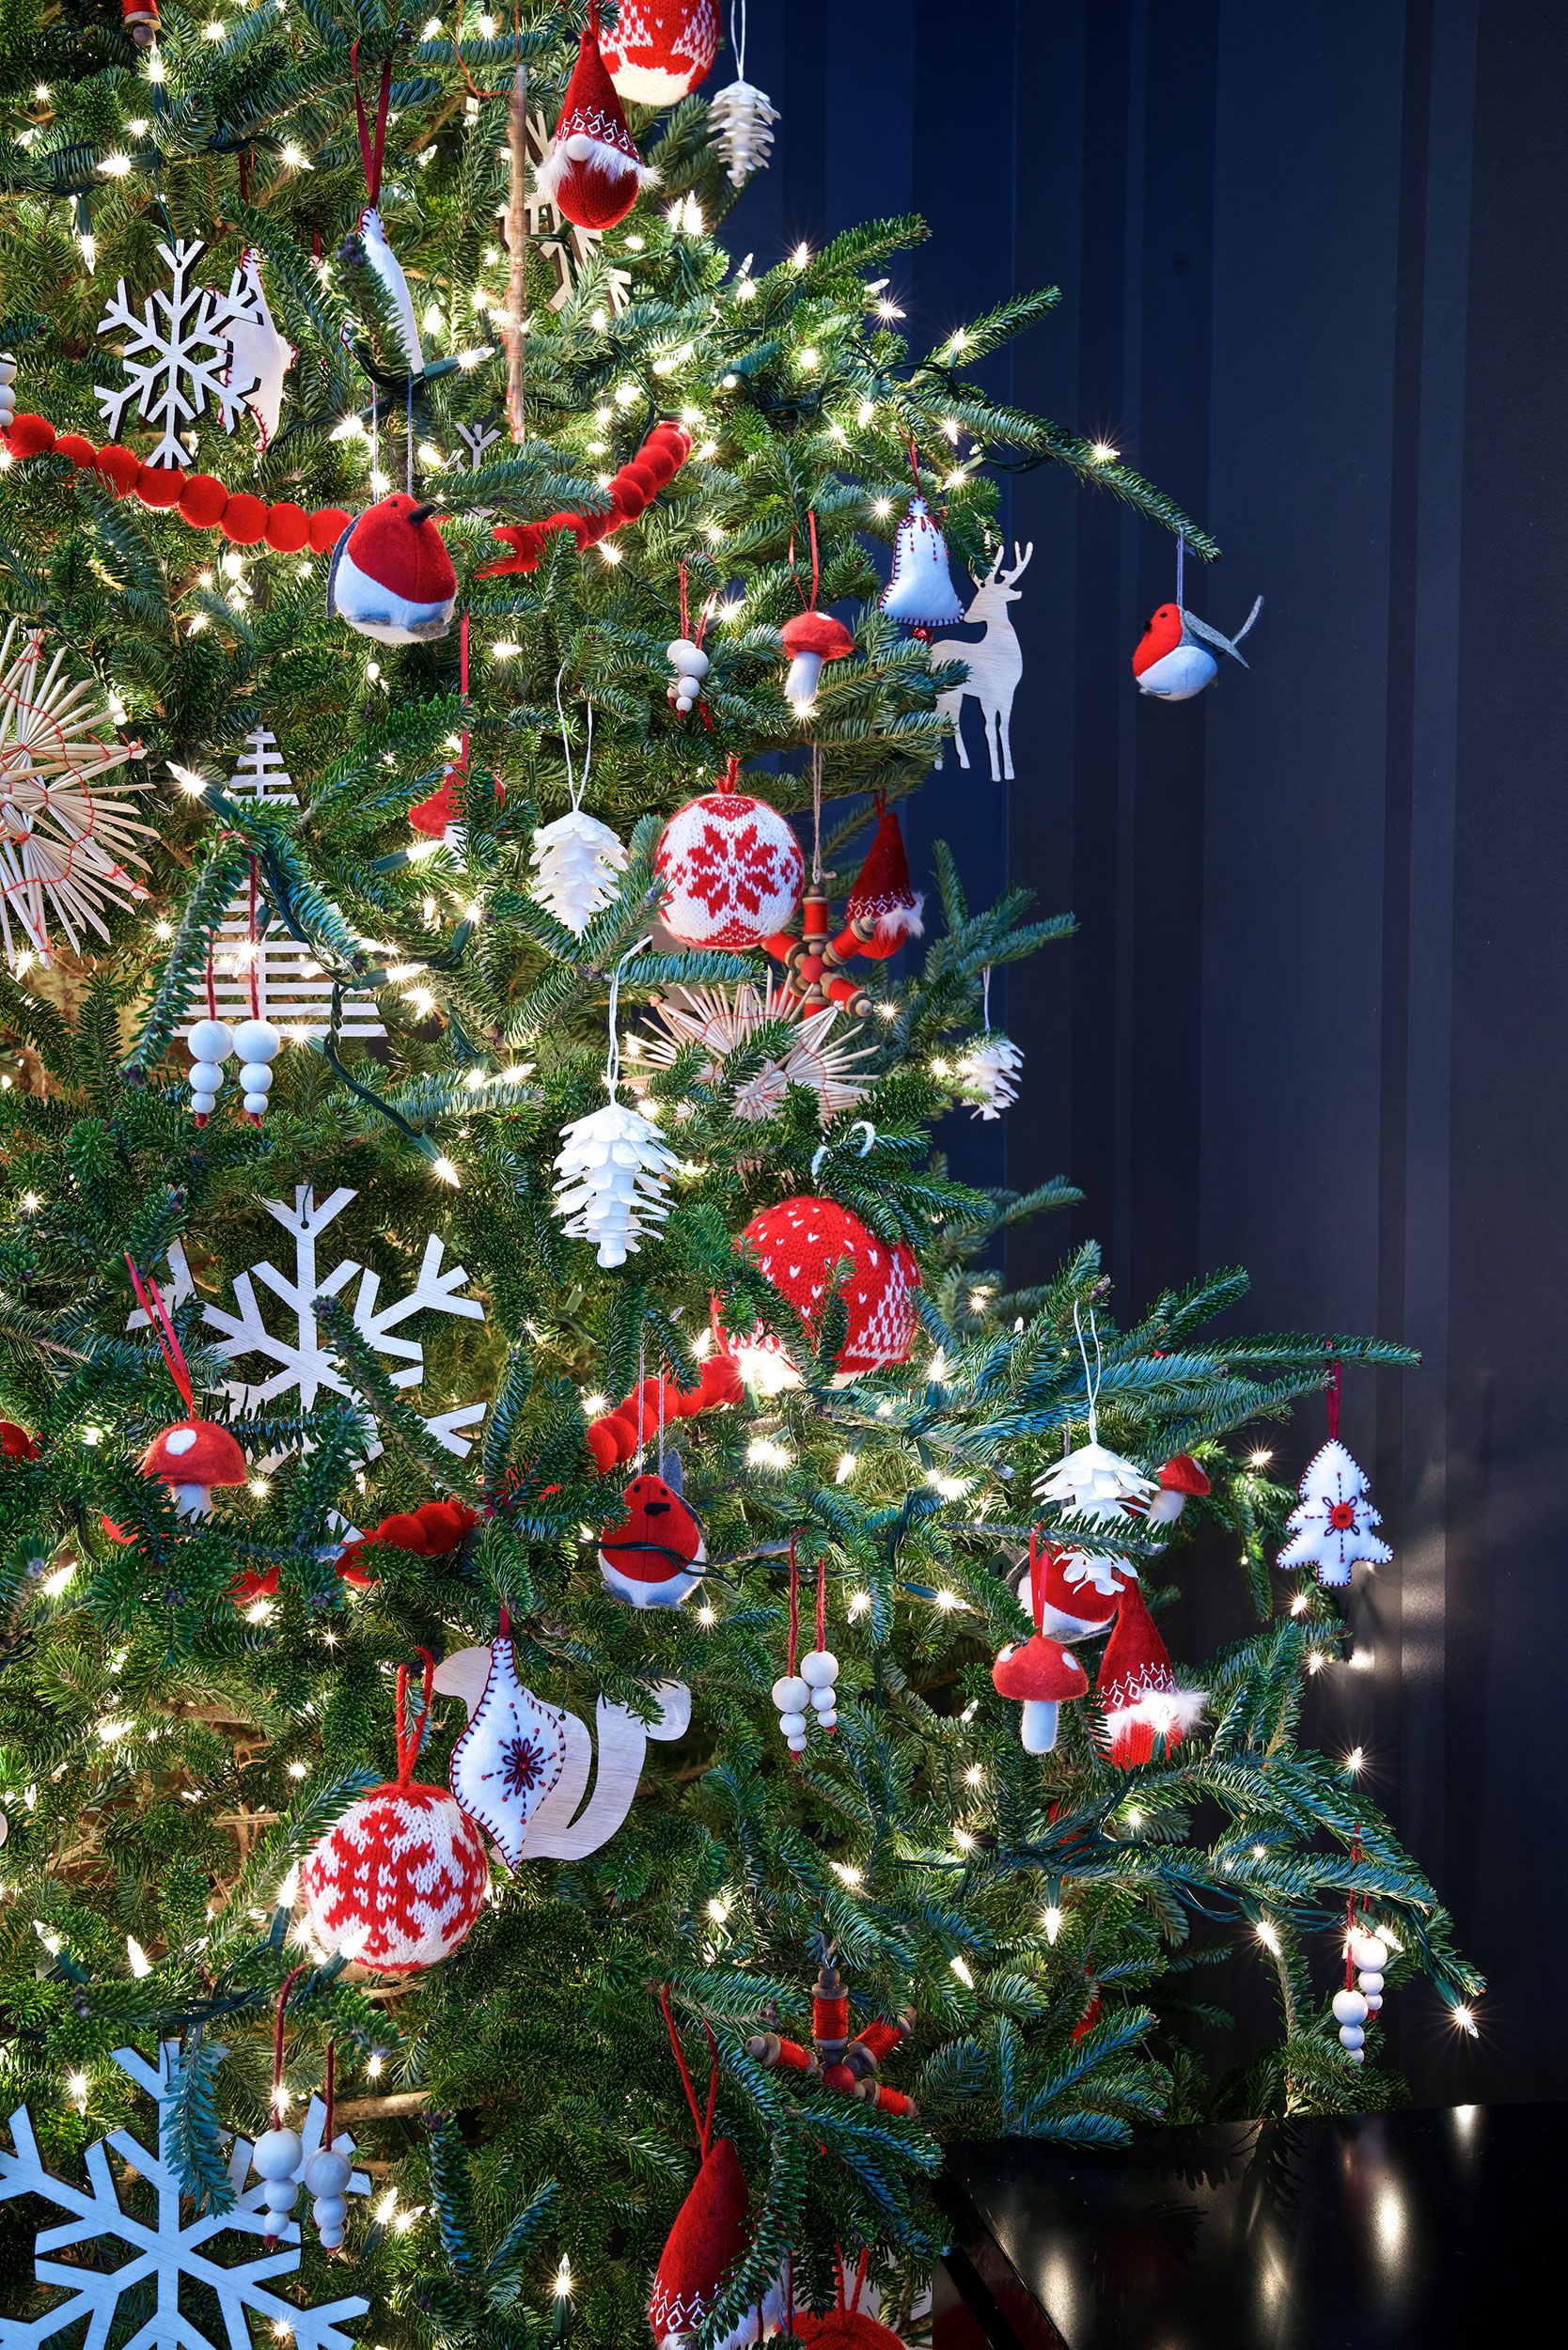 80 Christmas Tree Ideas That Prove It's the Most Wonderful Time of the Year